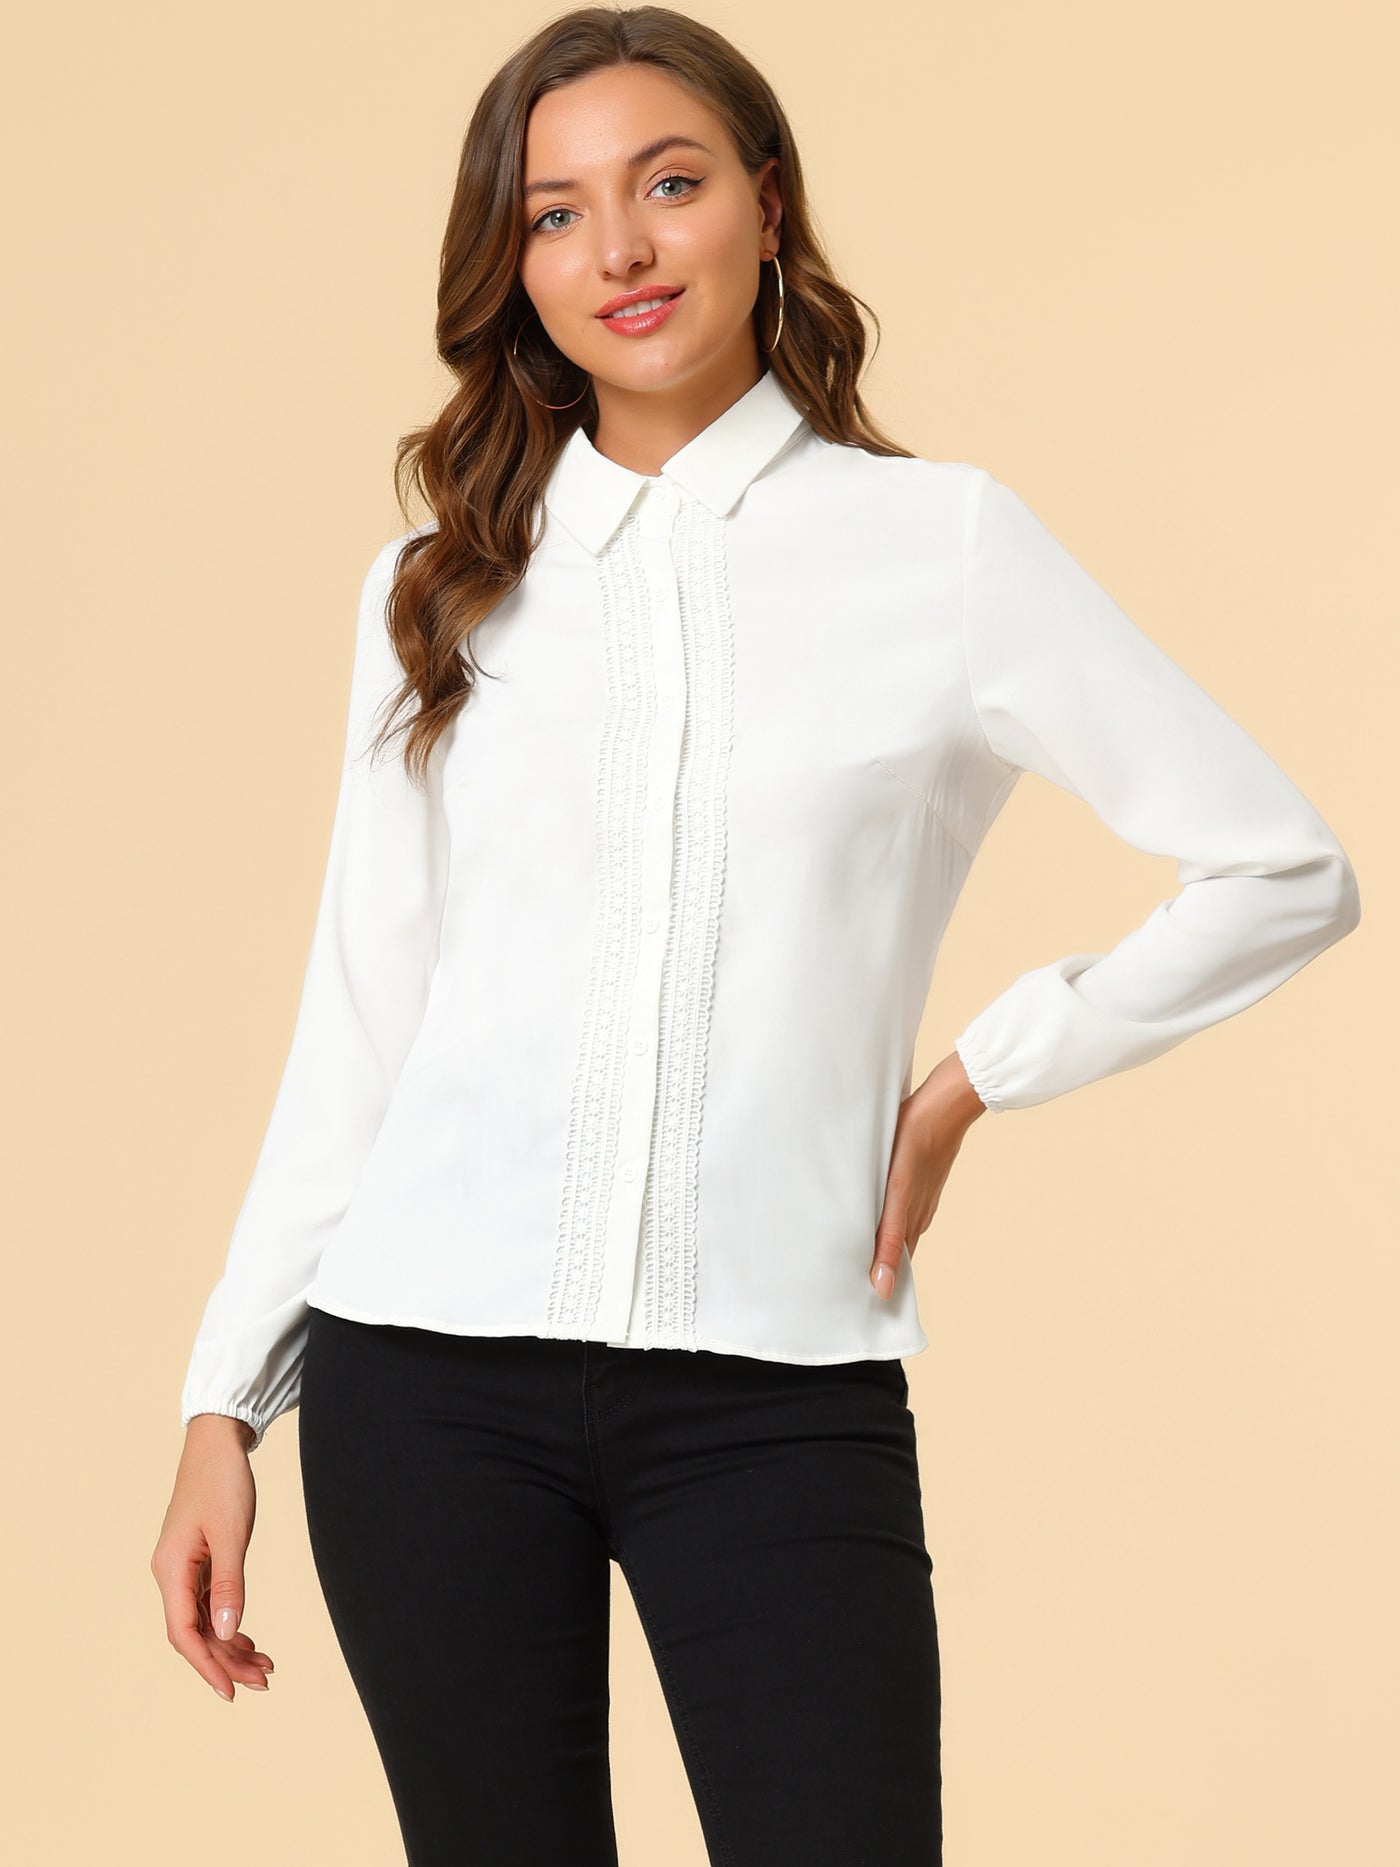 Allegra K Button Down Shirt Lace Trim Long Sleeve Collared Work Blouse Top